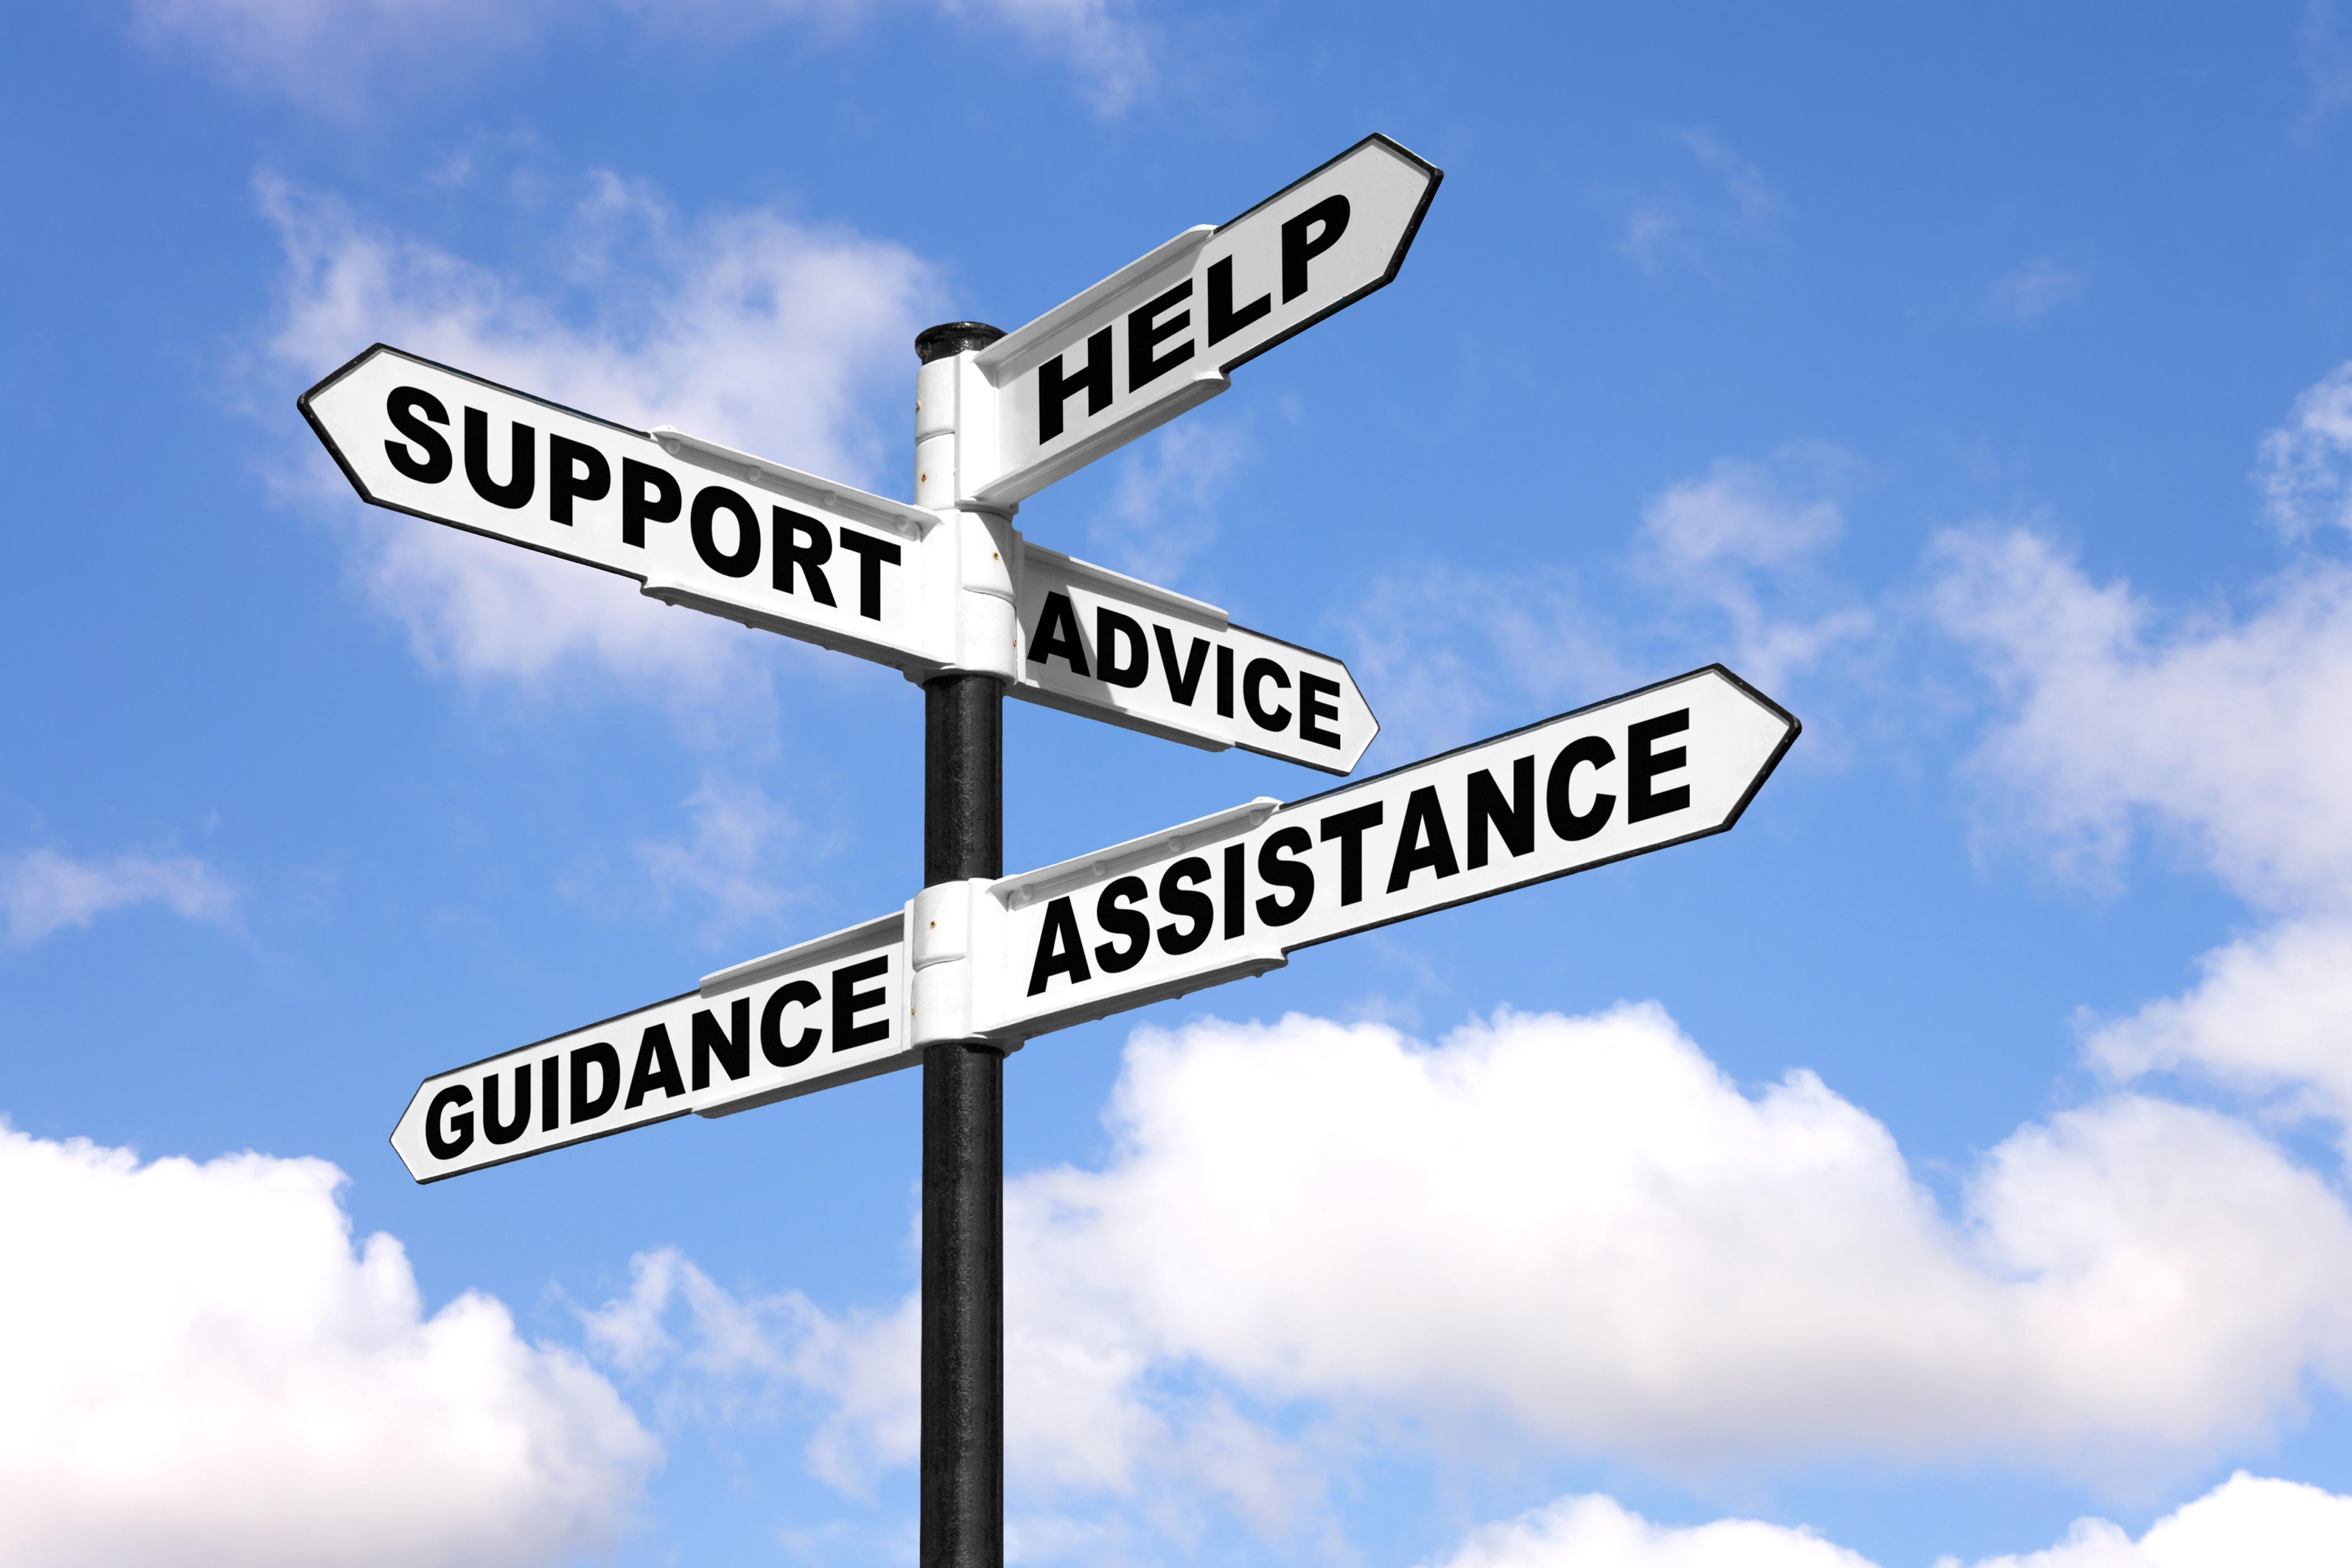 Signpost with help, support advice guidance and assistance